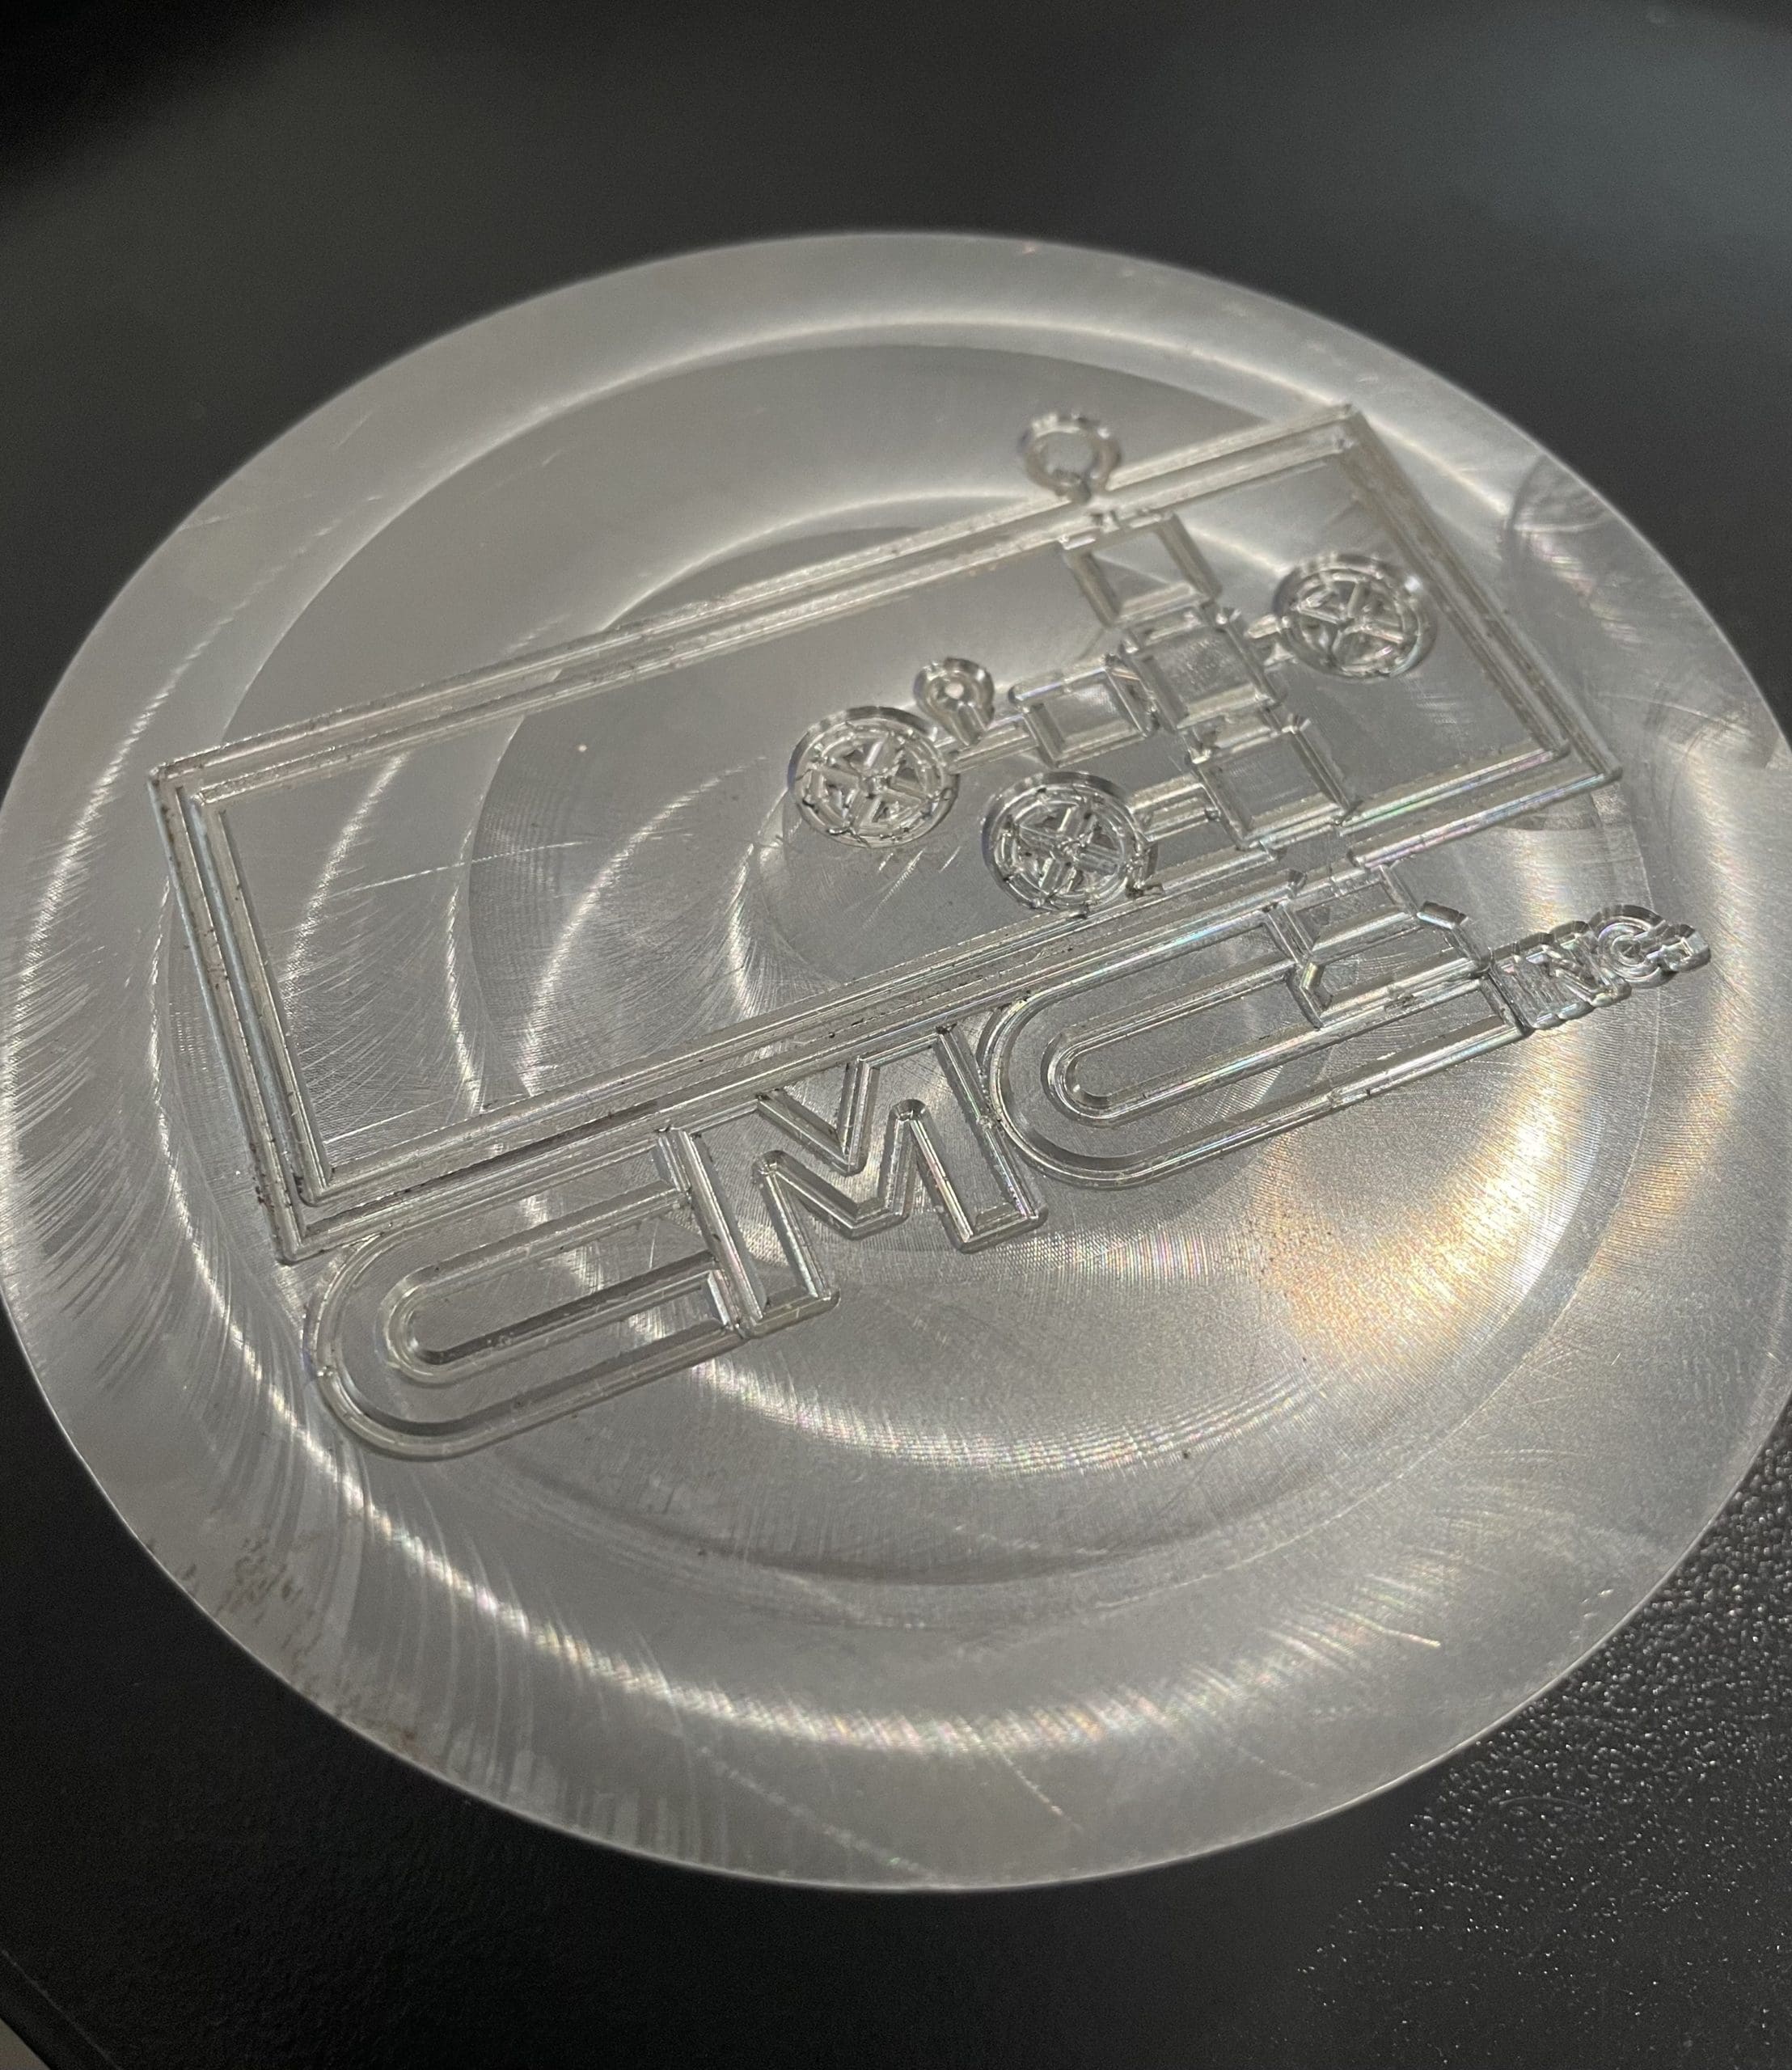 The machined logo (above).